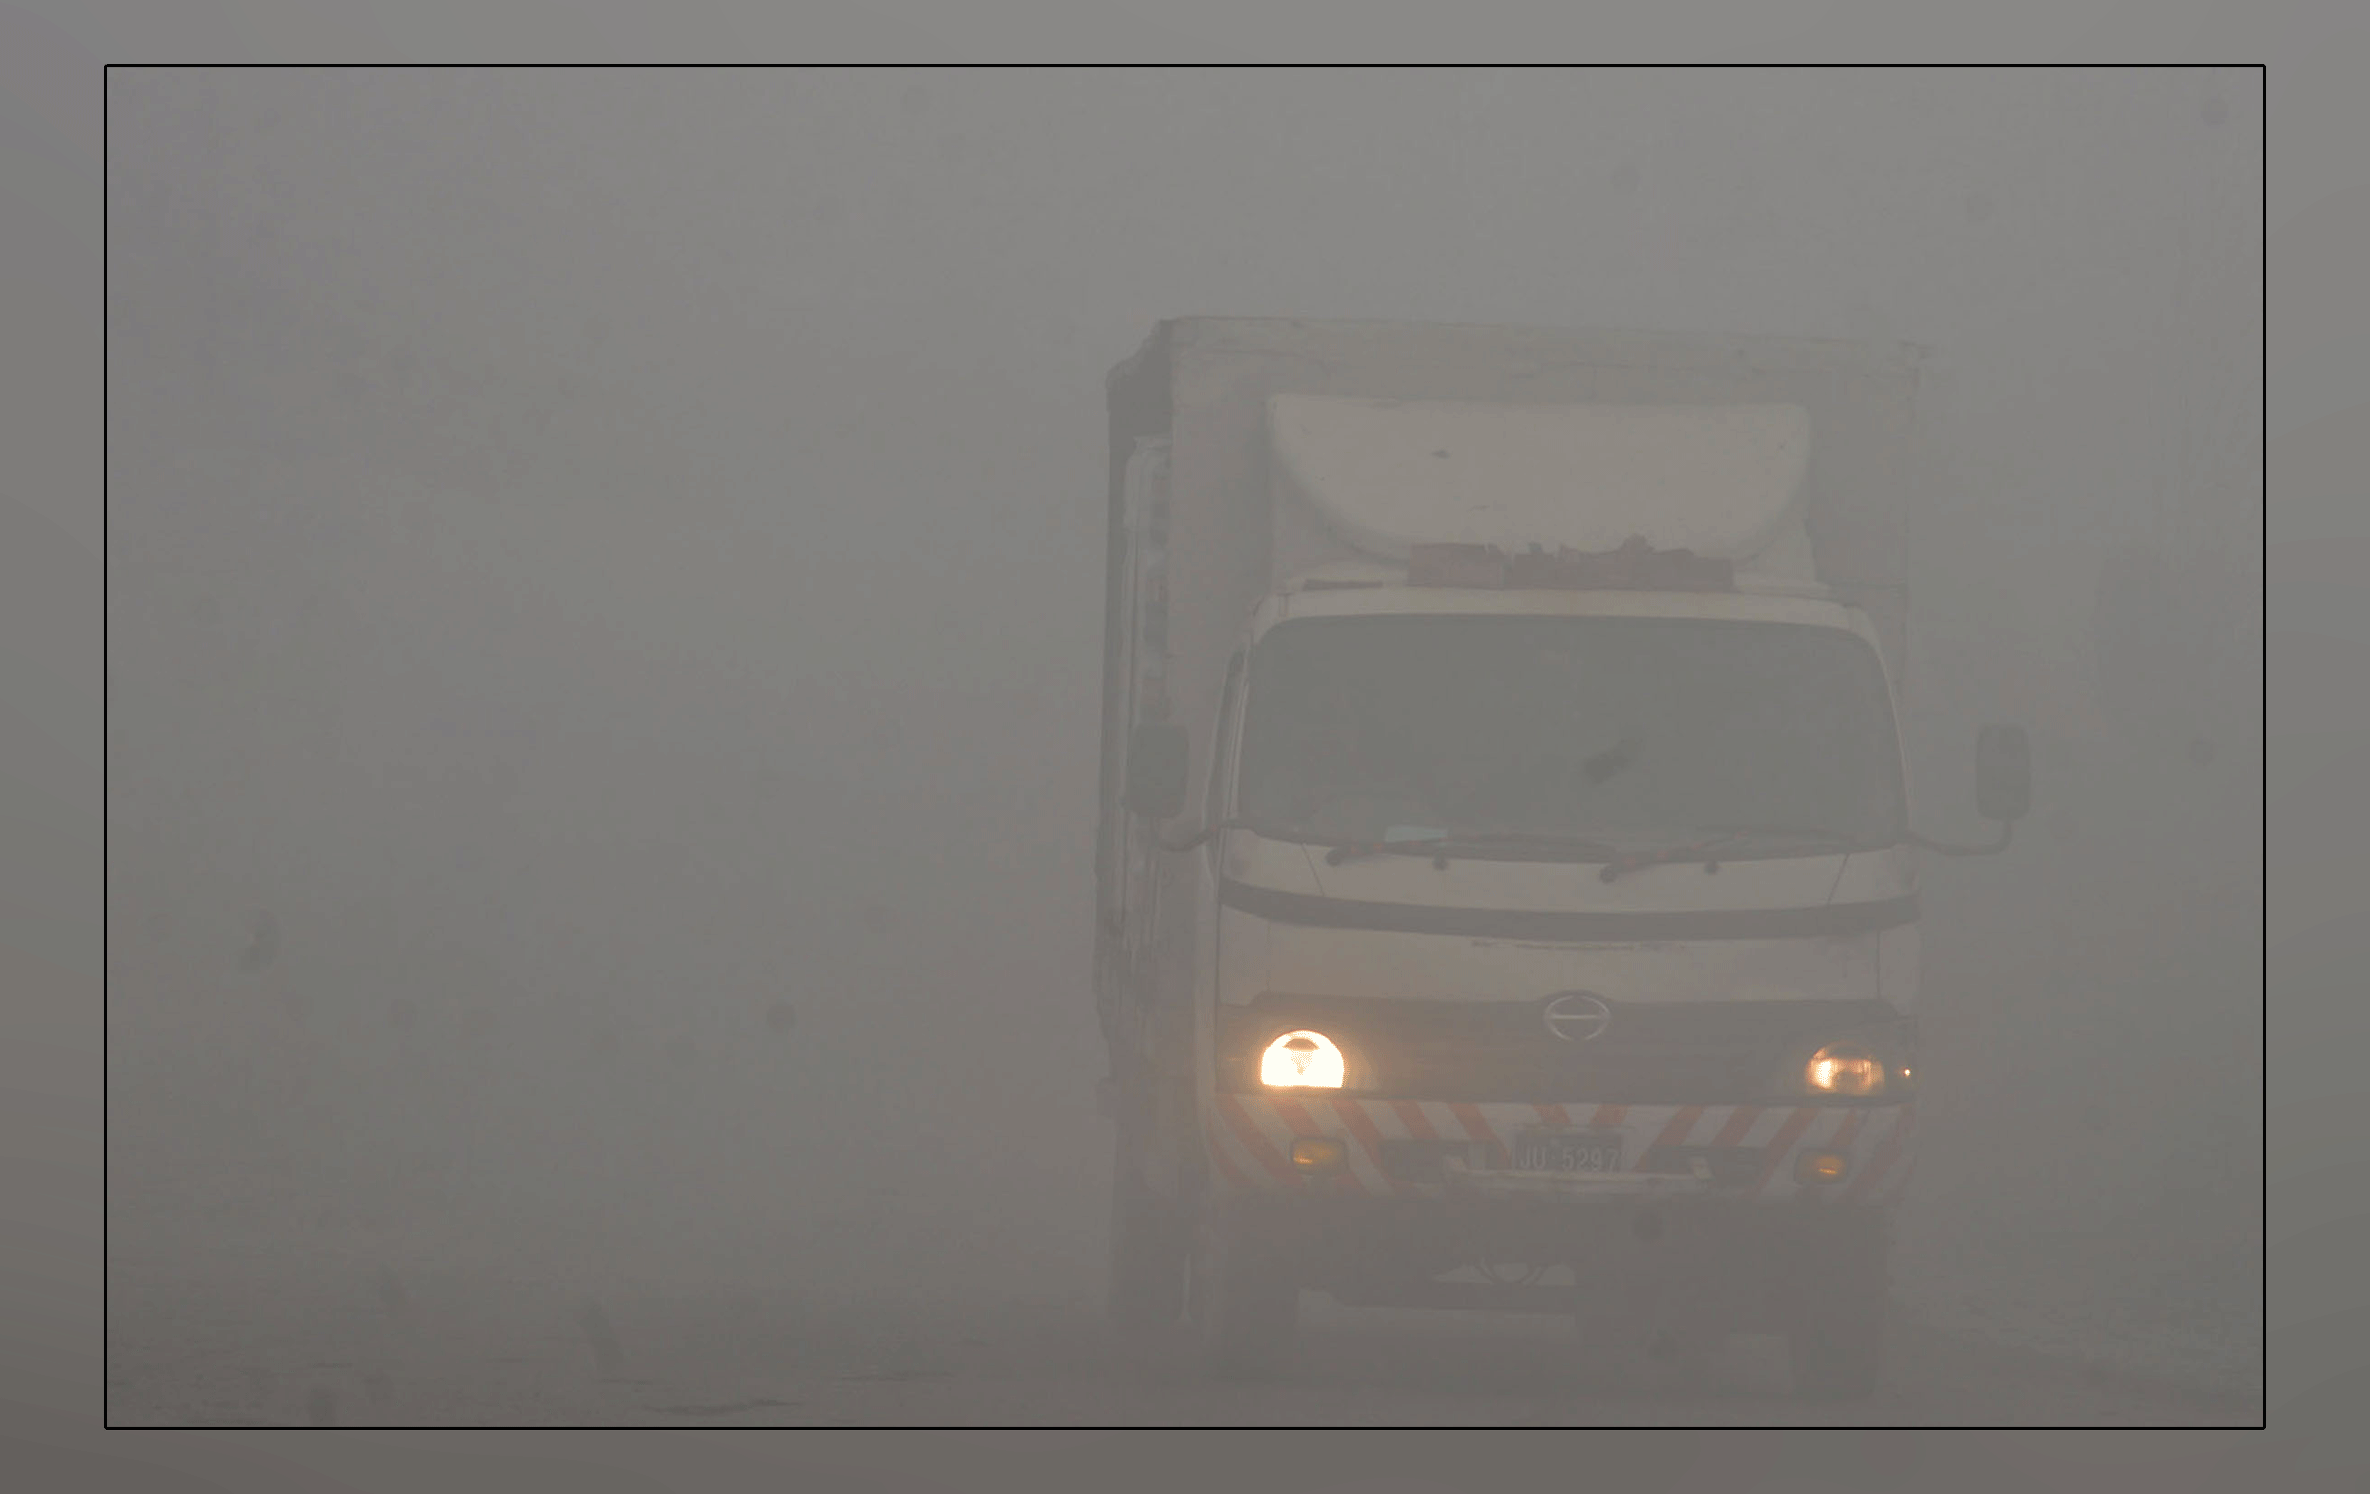 Heavy fog in Punjab and Lahore, caution while driving